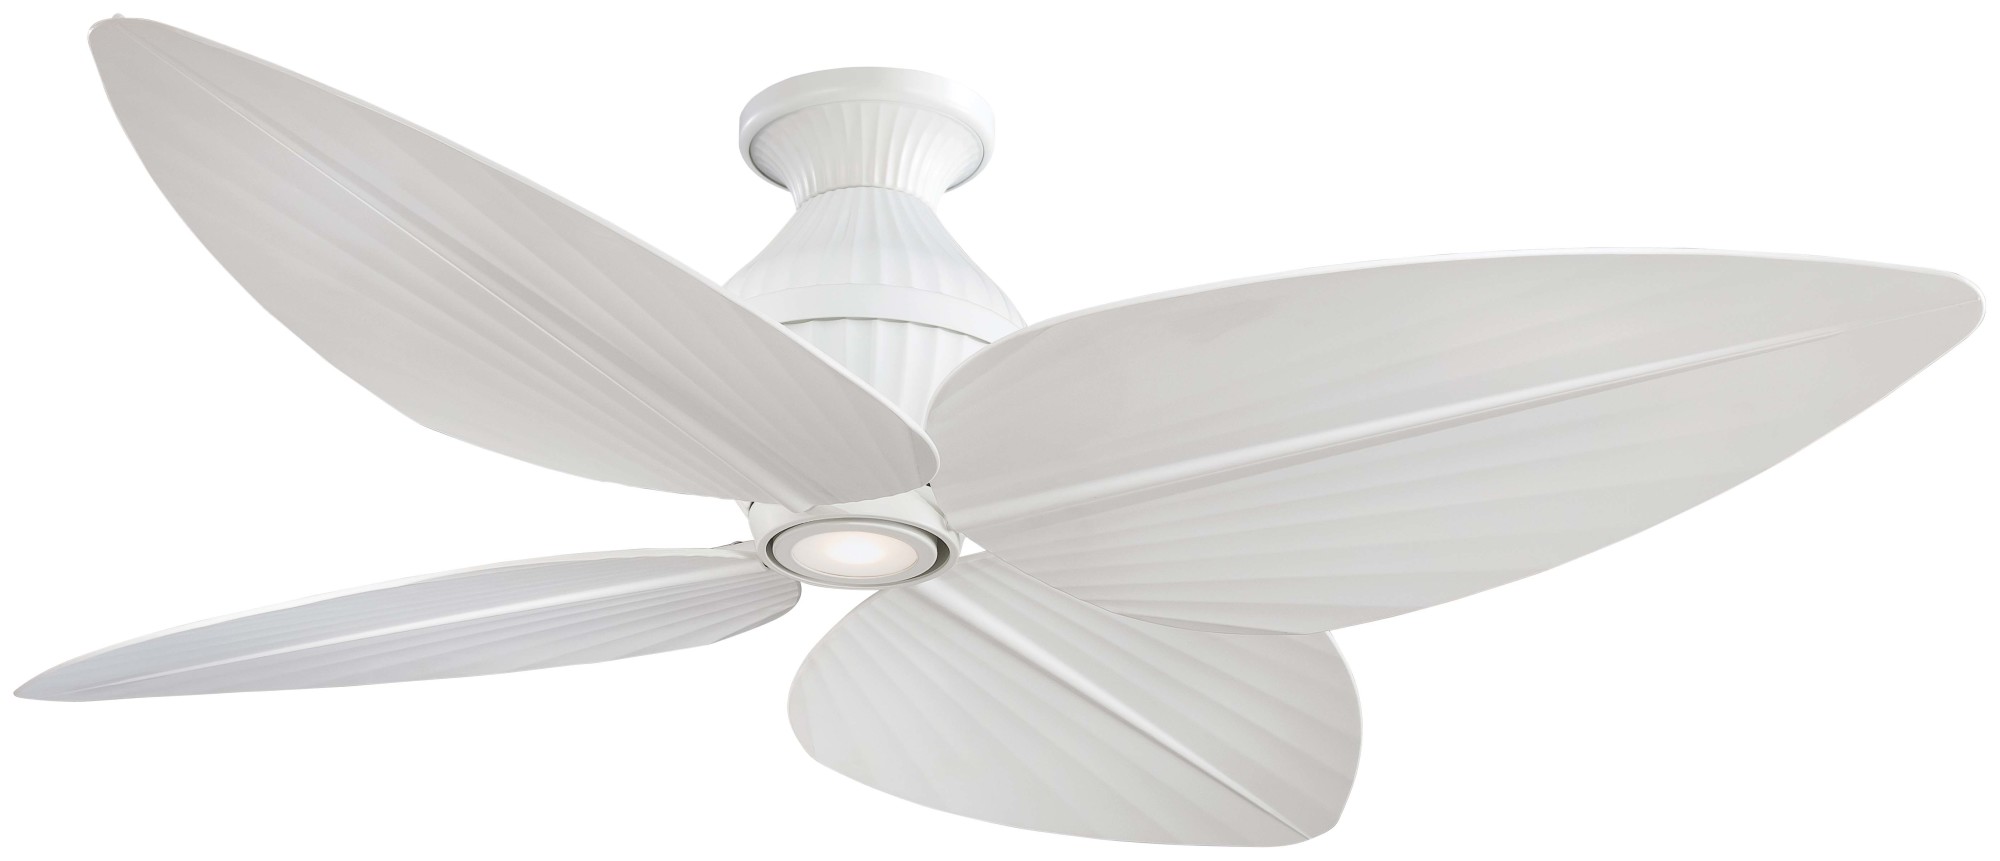 Minka Aire F581 Whf Gauguin 52 In Outdoor Ceiling Fan White For